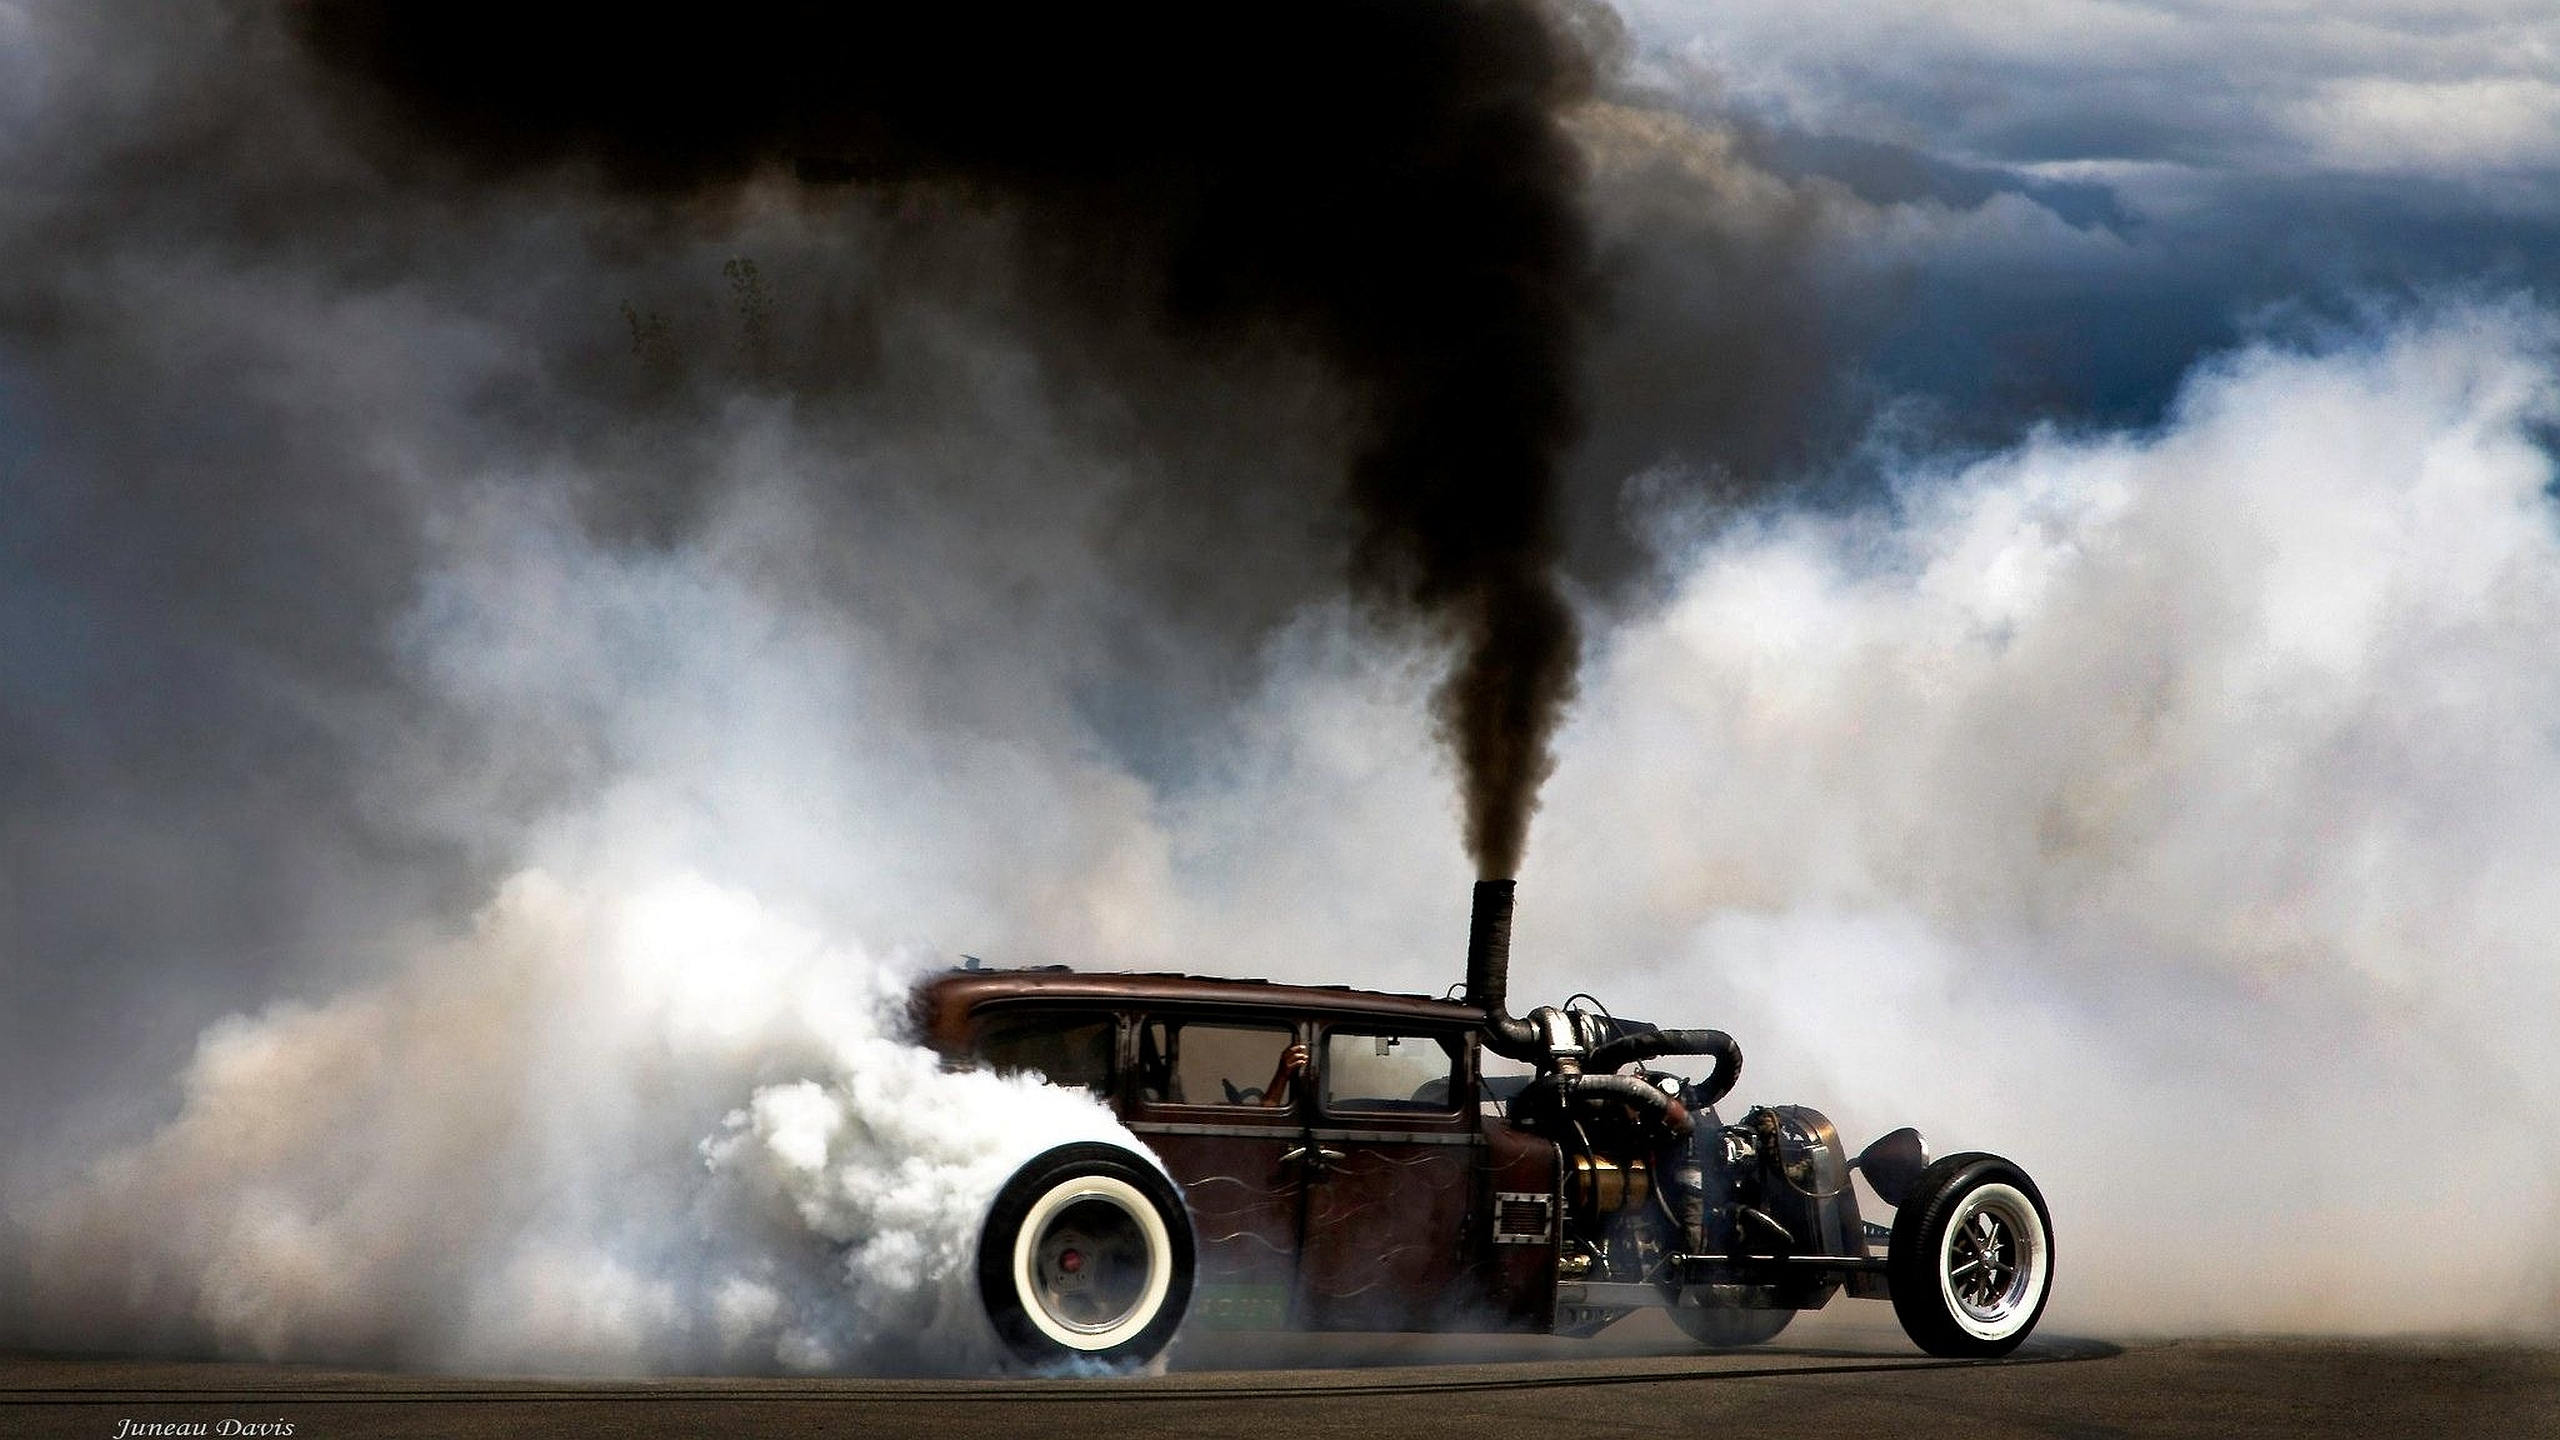 2560x1440 Ratrod HD Wallpapers and Backgrounds